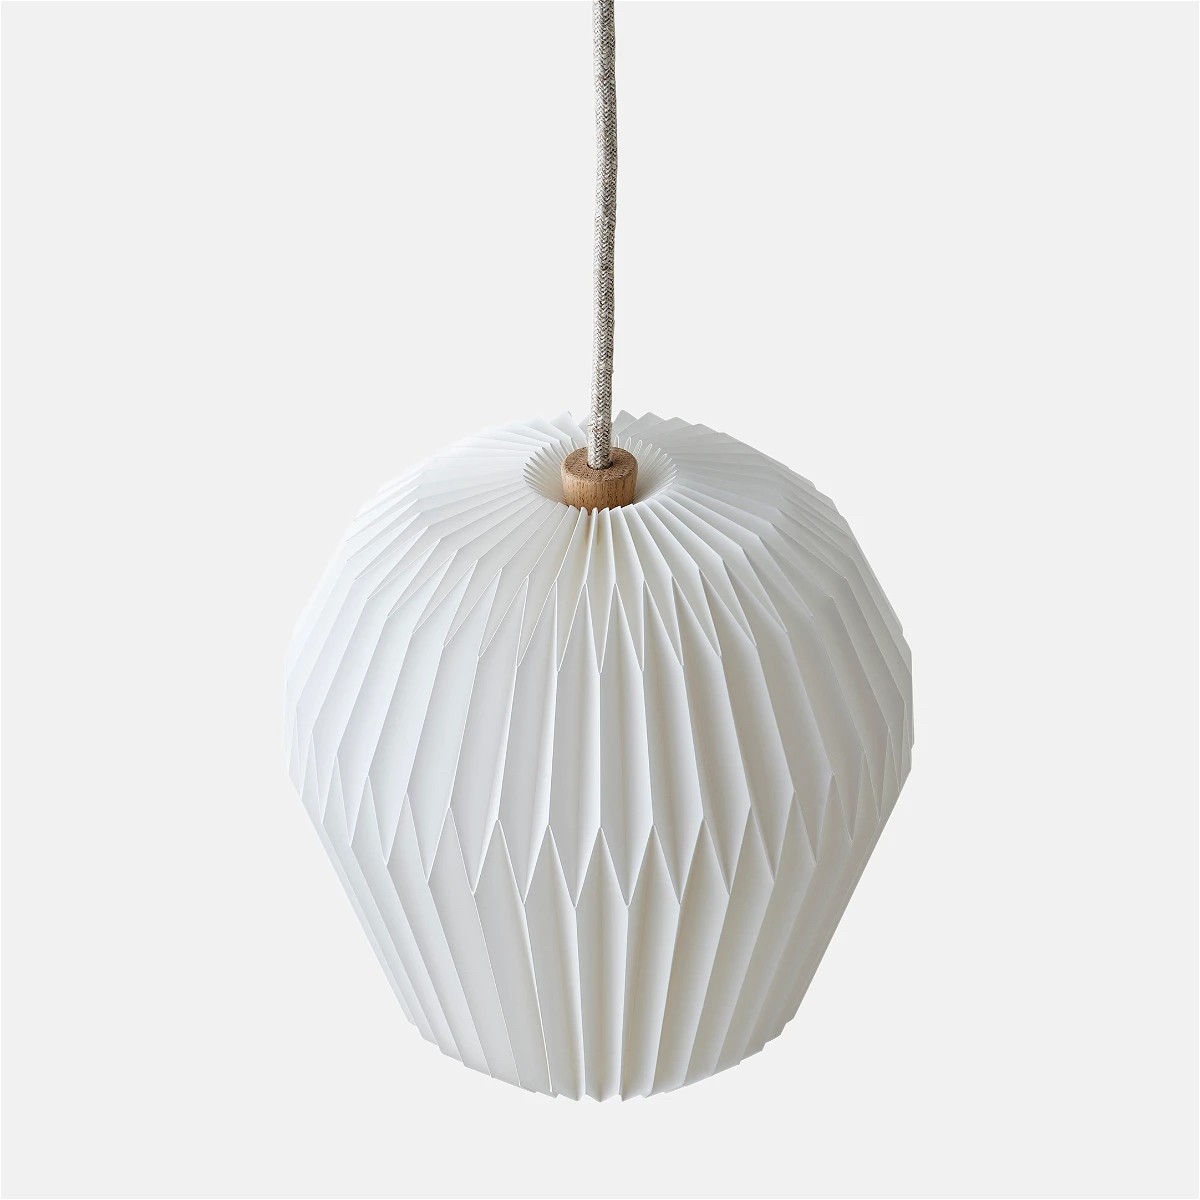 a white paper lantern hanging from a string